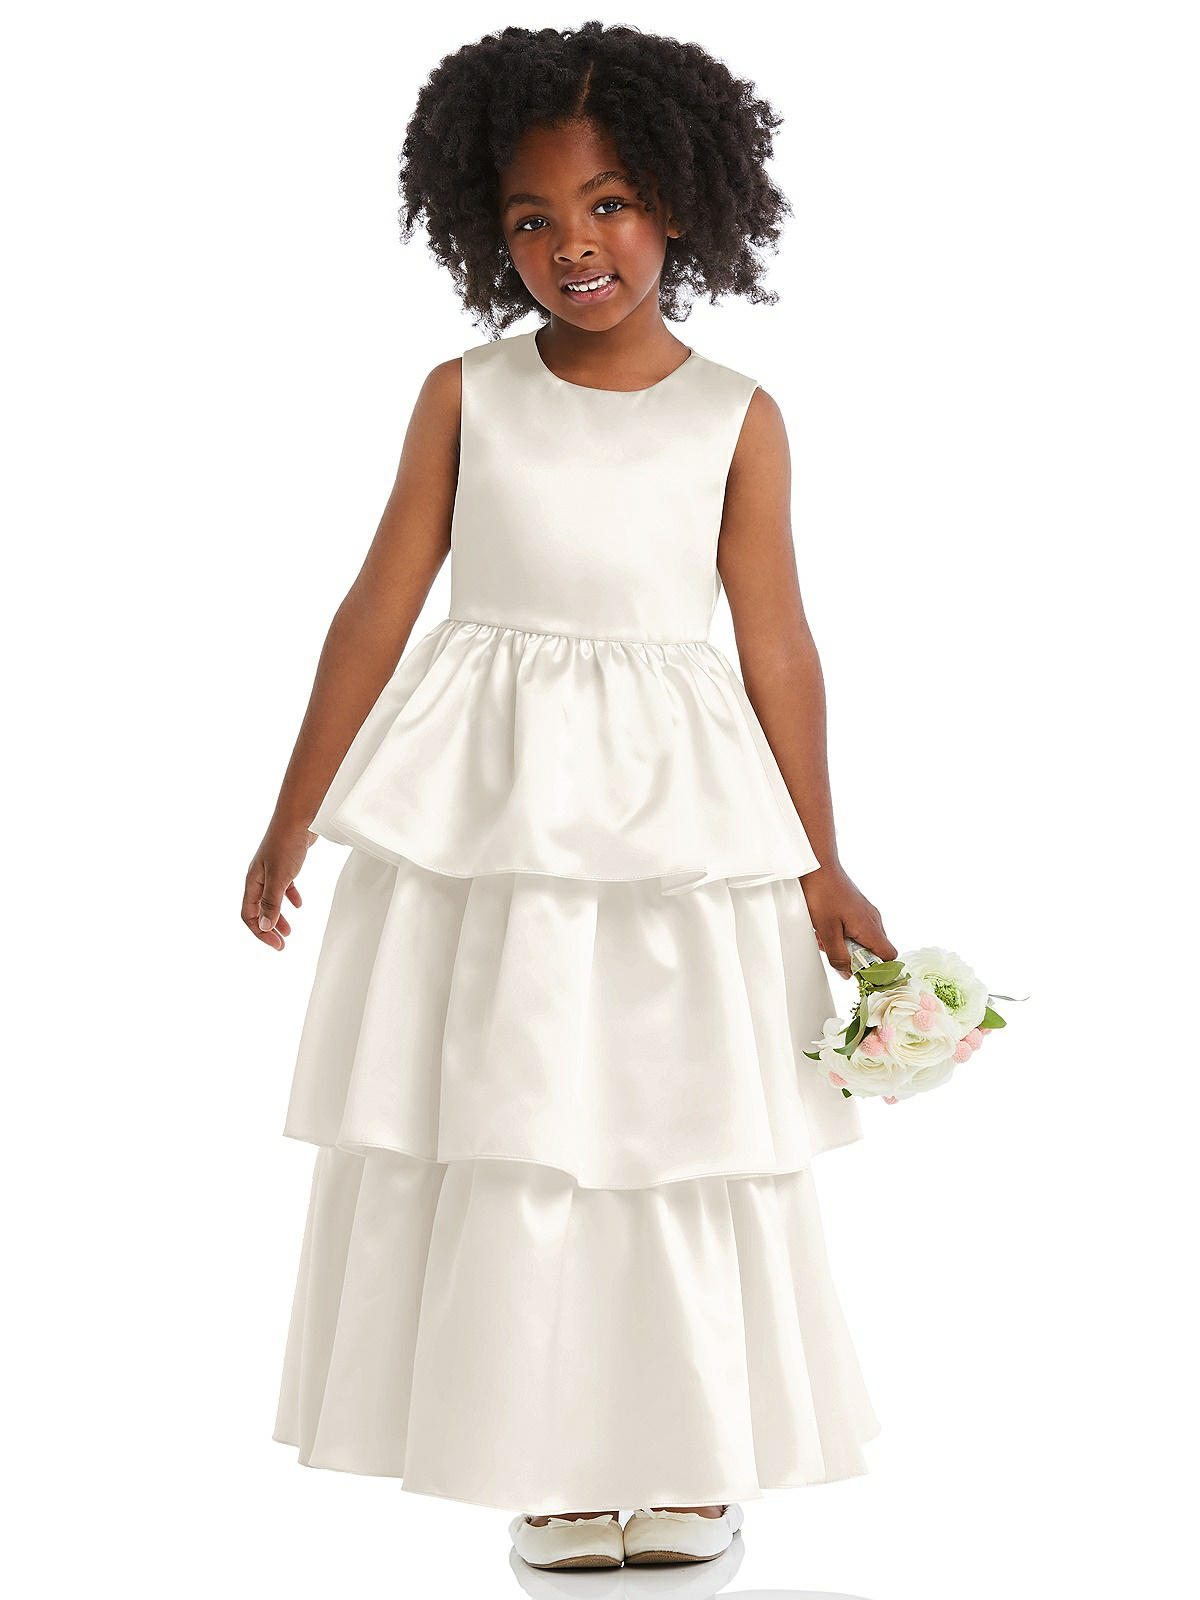 Jewel Neck Tiered Skirt The Dress Dessy Ivory In Flower Group Girl Satin 